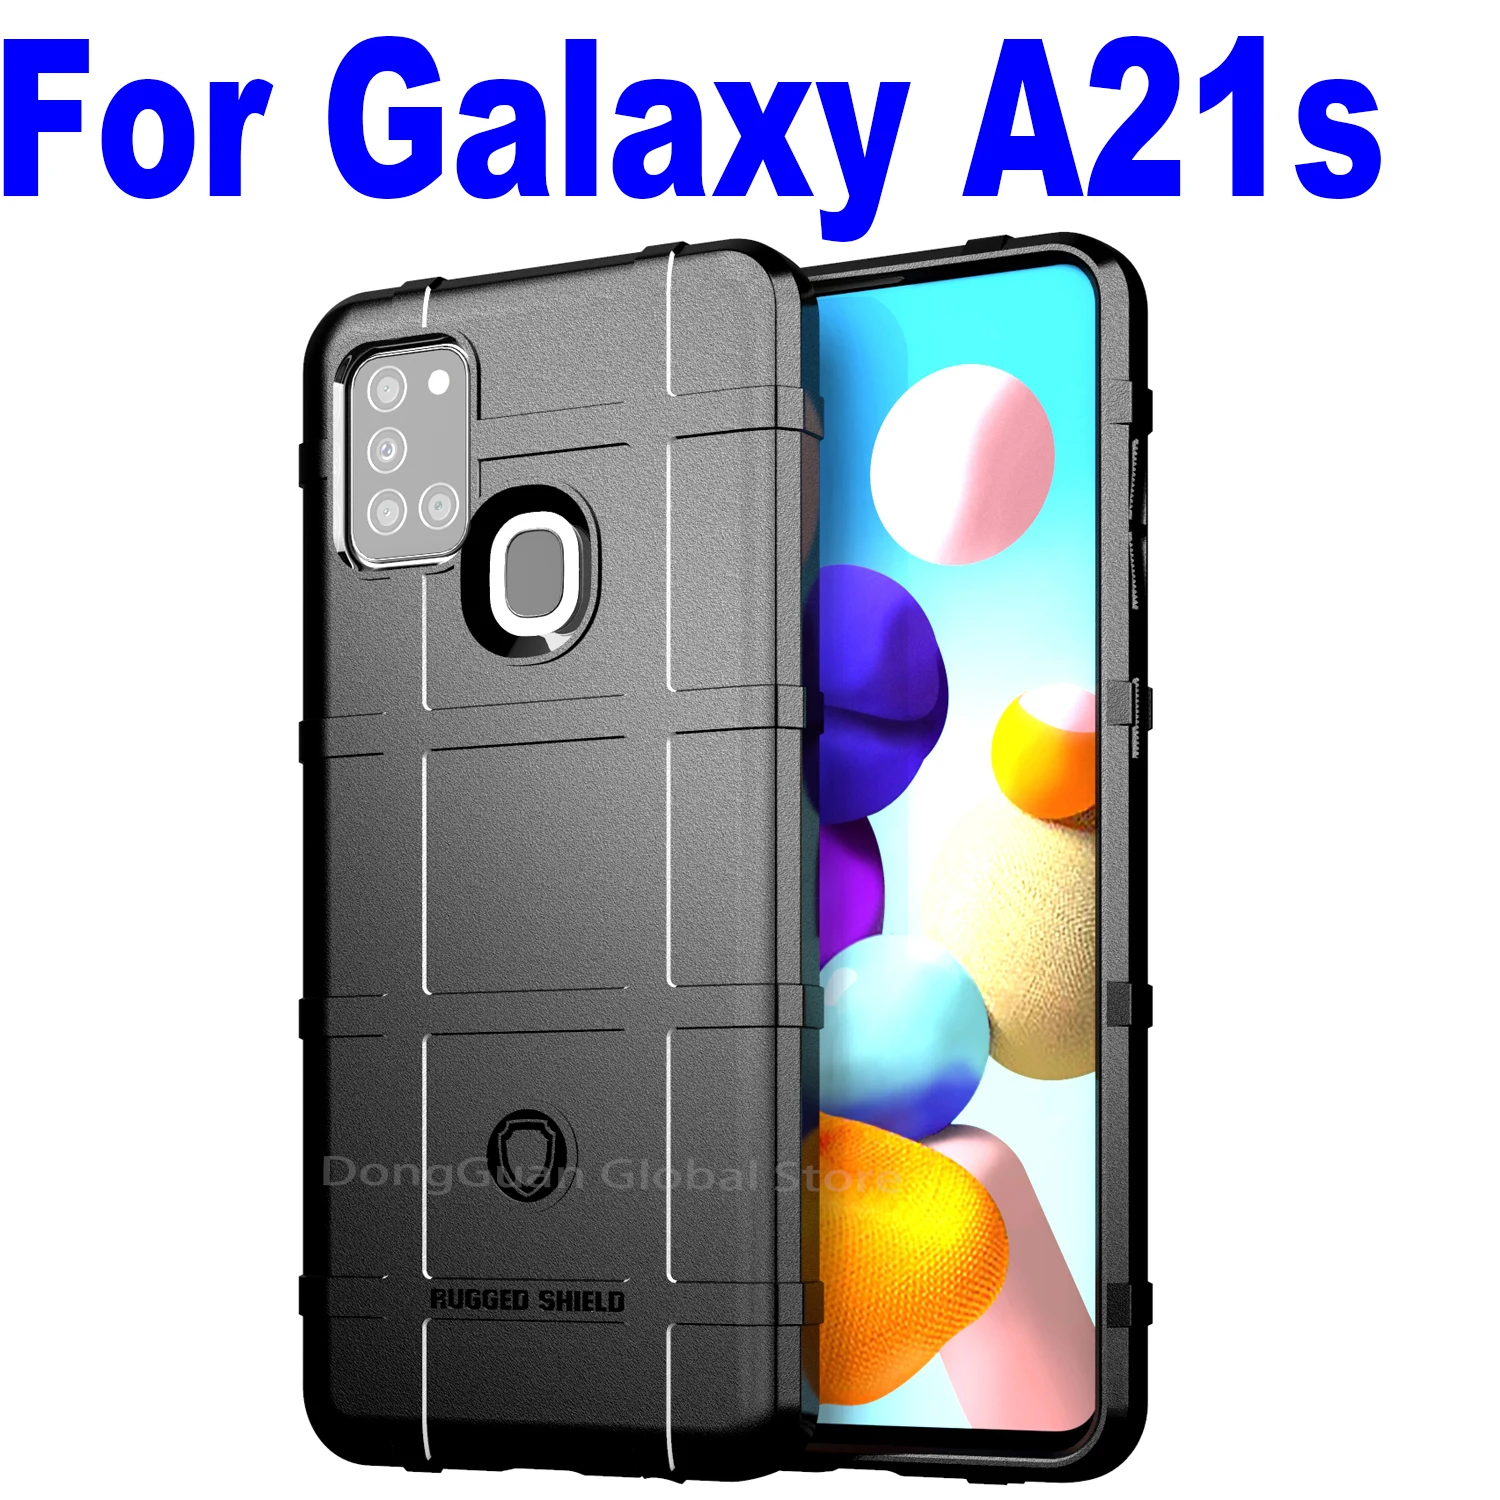 

Rugged Shield Shockproof Armor Case For Samsung Galaxy A21s SM-A217 Cover Shell Case